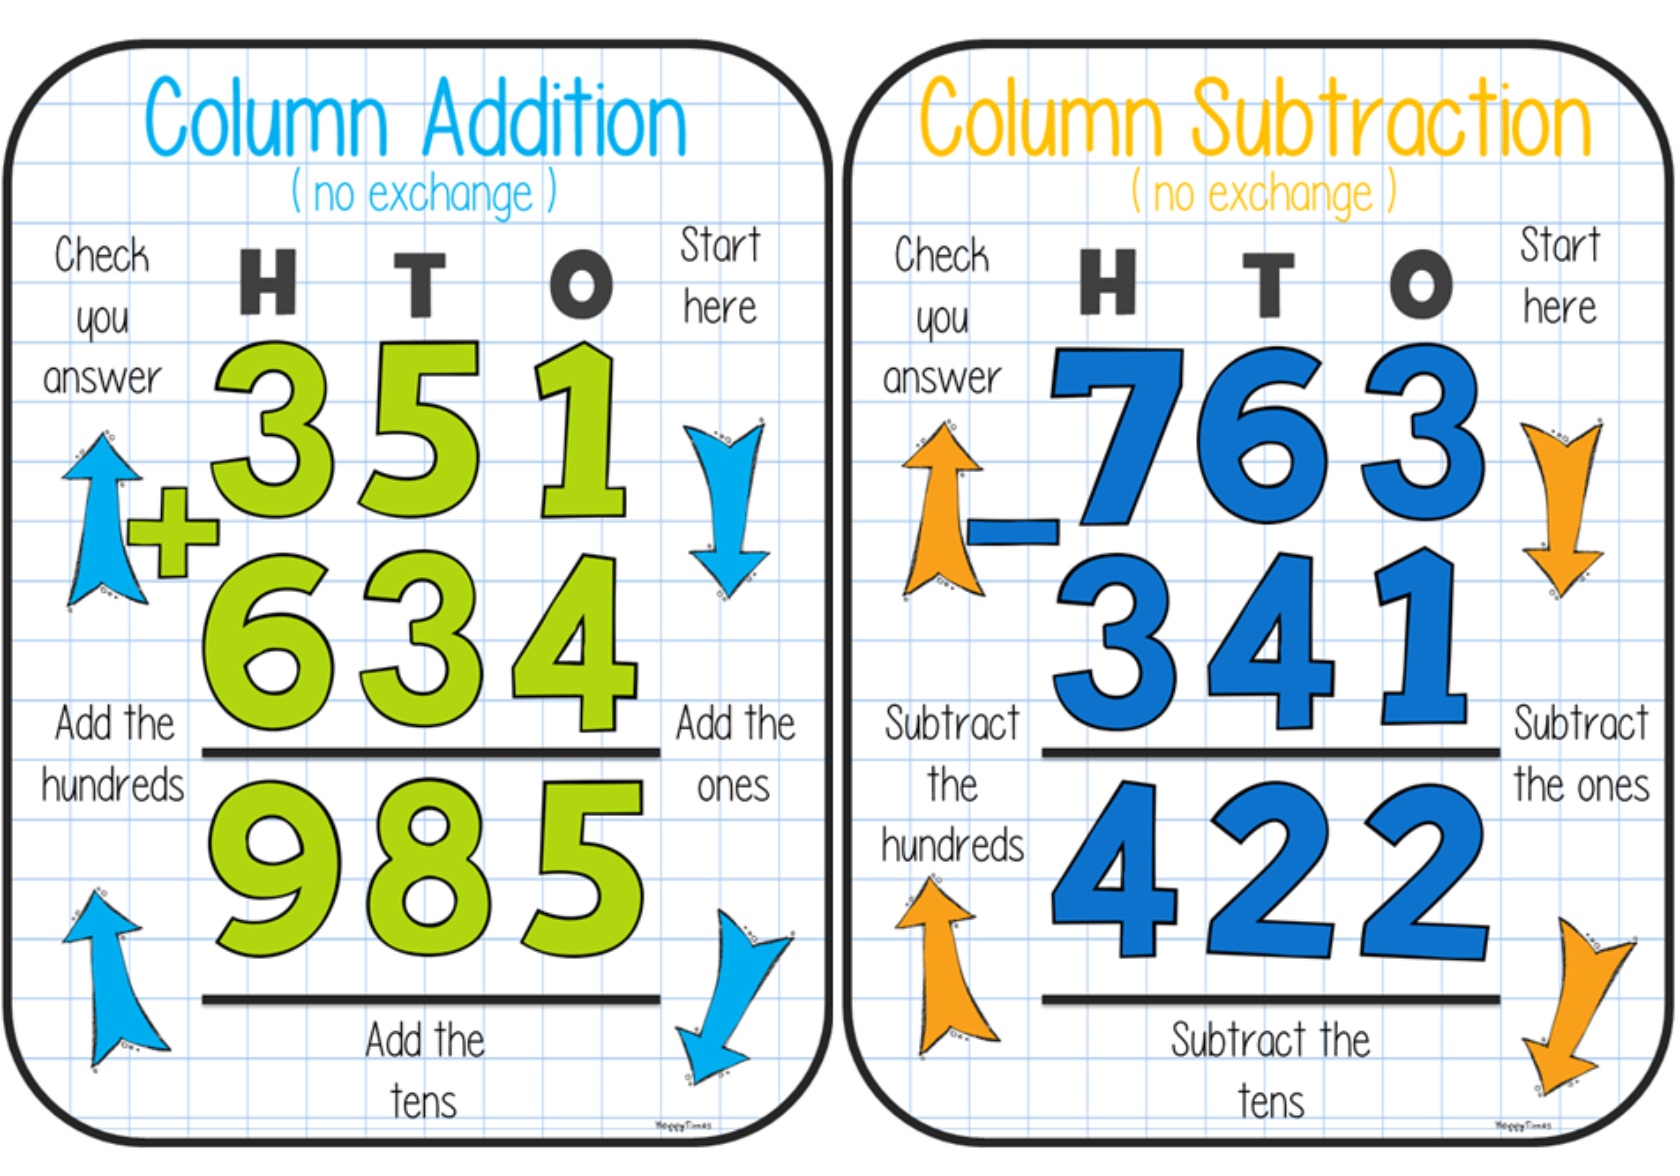 column-addition-and-subtraction-64-plays-quizizz